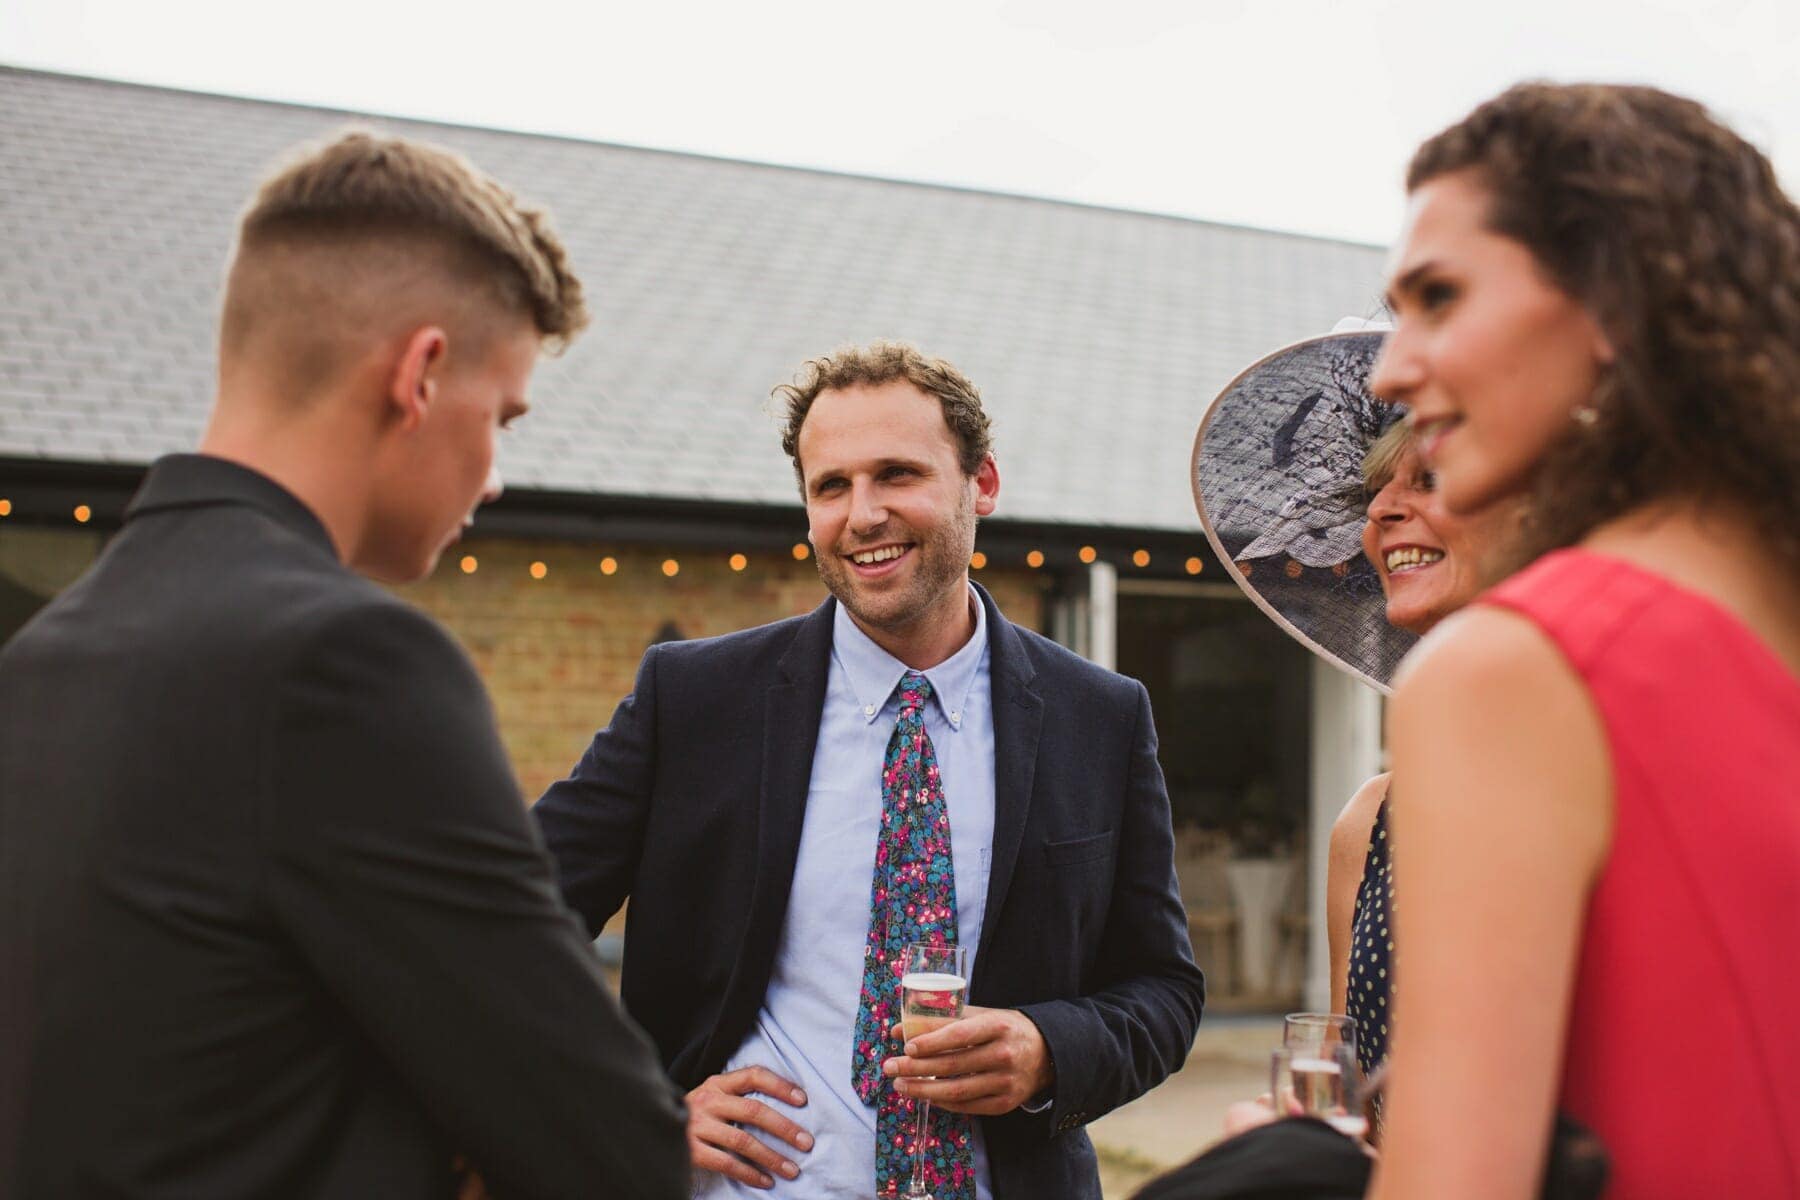 suffolk rustic and relaxed barn wedding drinks reception